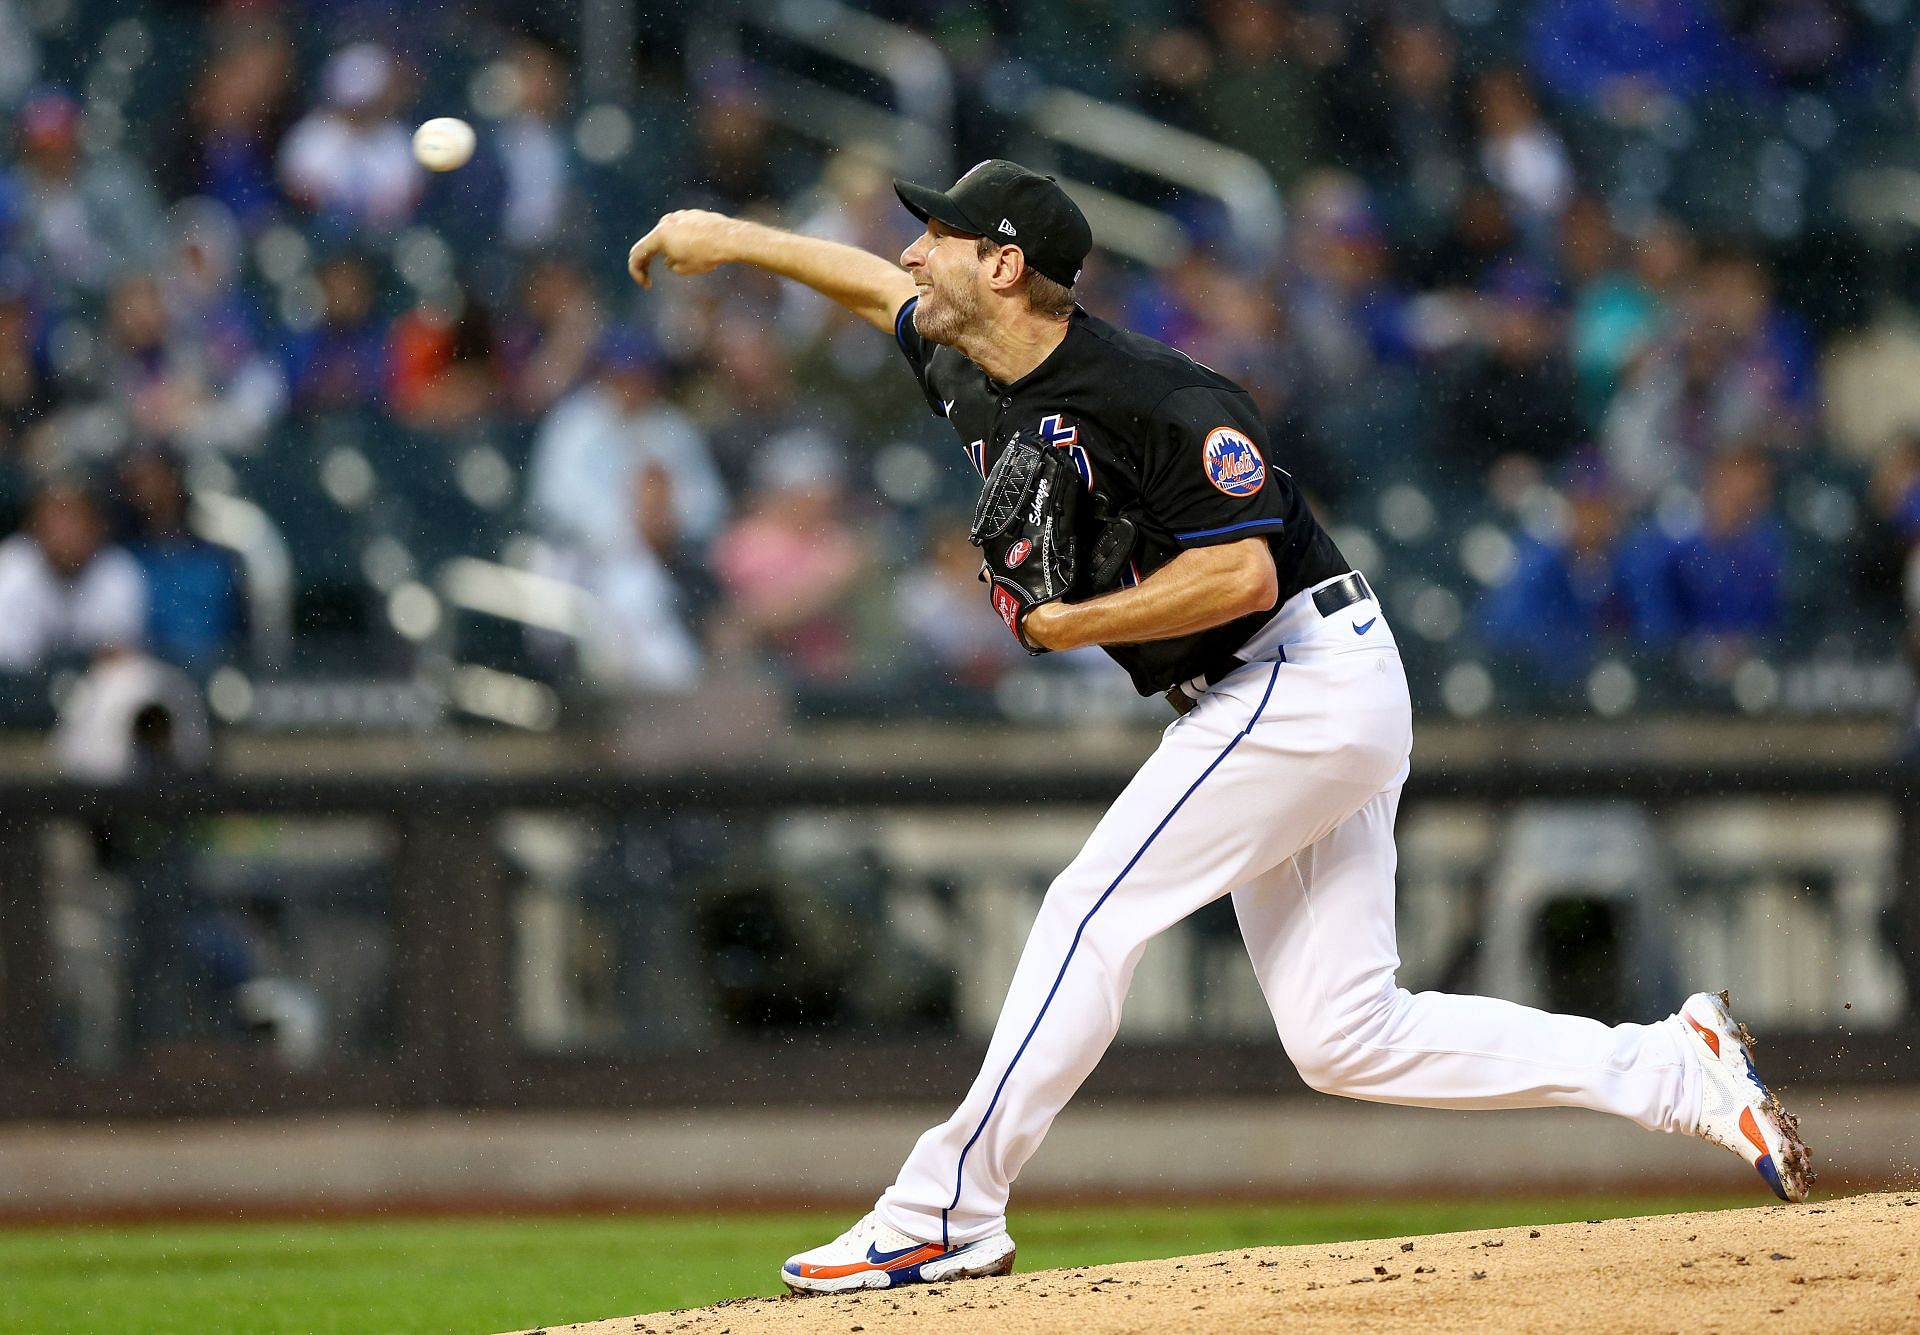 Max Scherzer of the New York Mets delivers a pitch in the first inning against the Seattle Mariners.